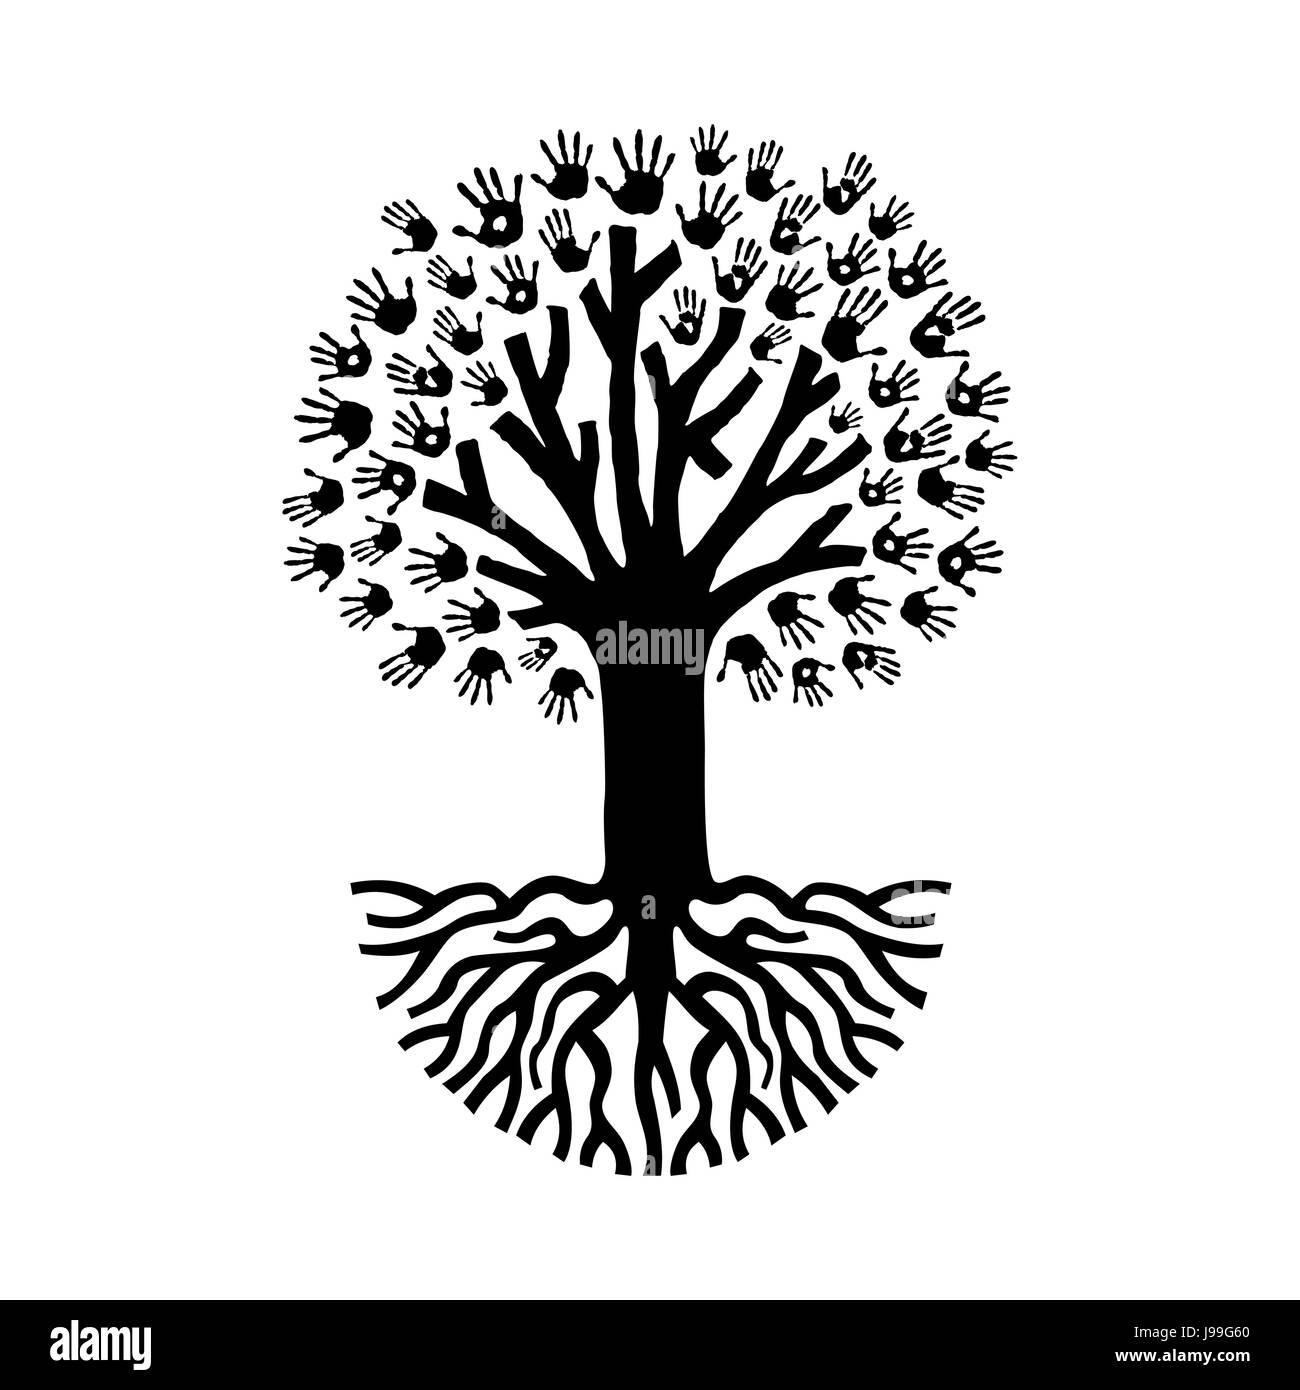 Diverse hand prints isolated tree over white with big roots. Community help and teamwork concept illustration. EPS10 vector. Stock Vector